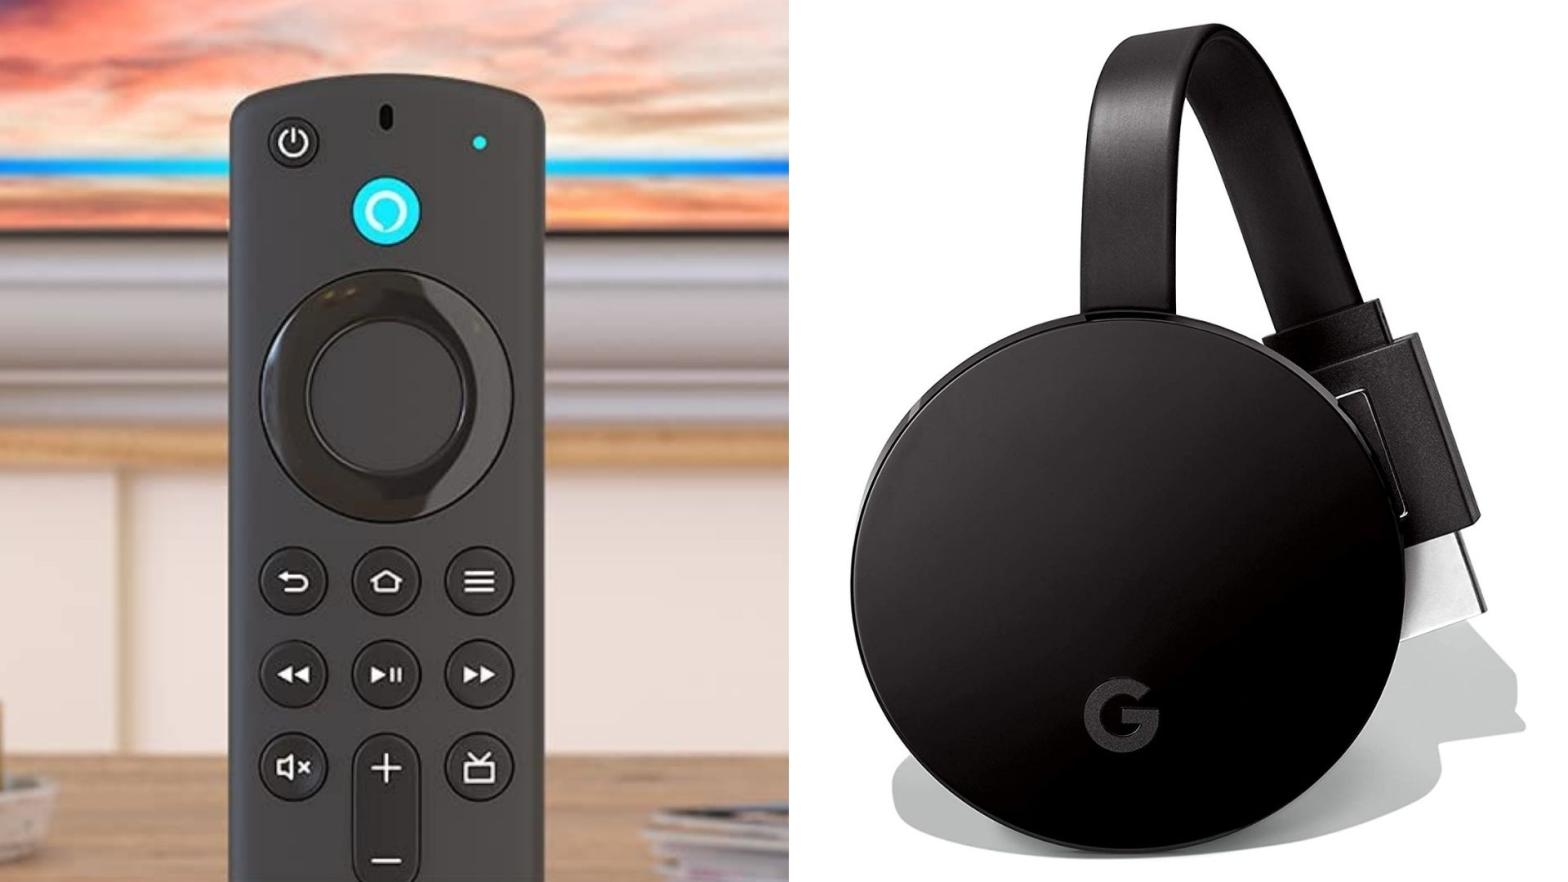 Which streaming device is better? The Google Chromecast Ultra or the Amazon Fire TV Stick 4K Max?